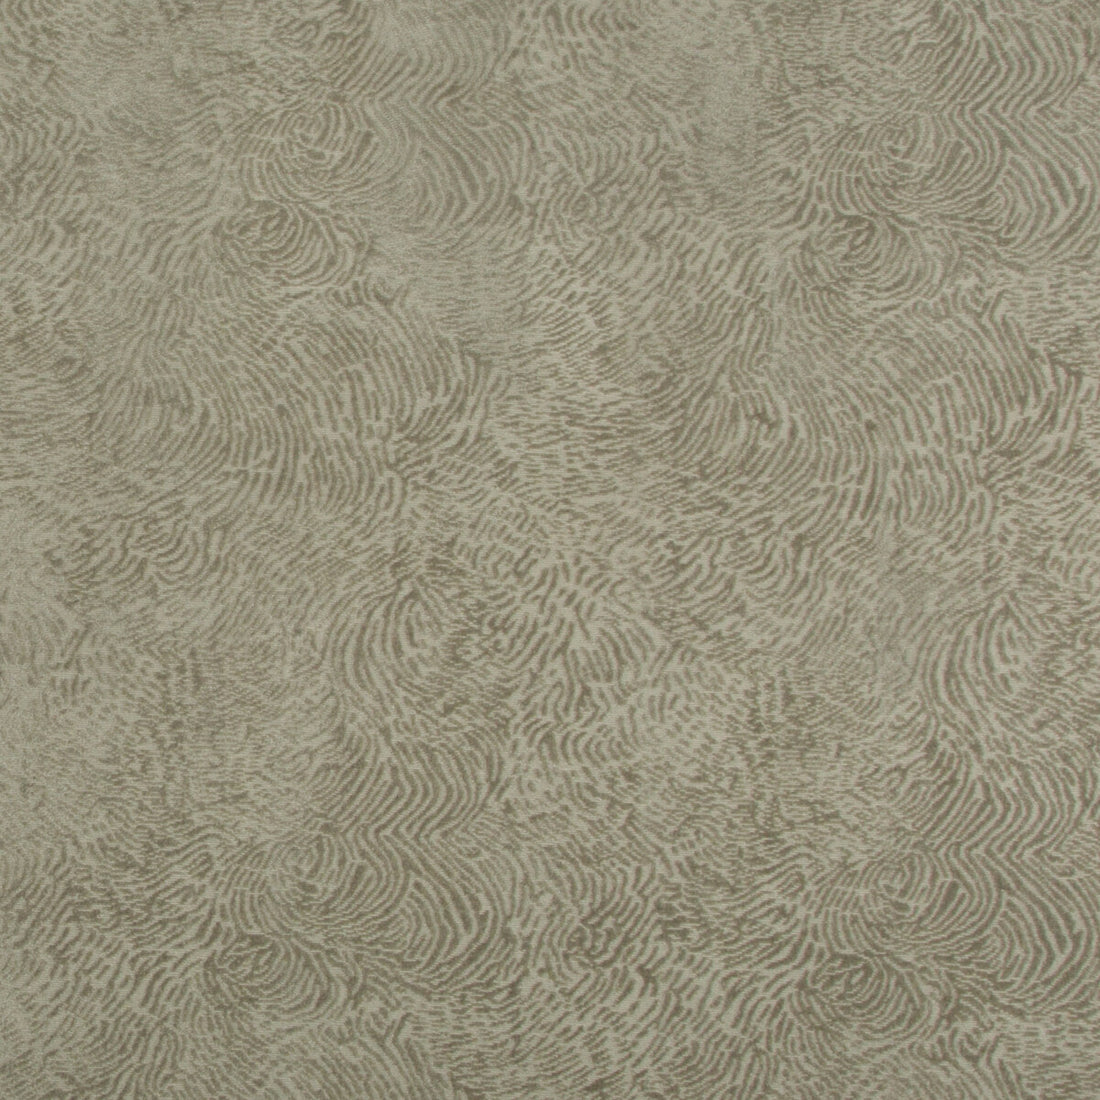 Solitare fabric in sage color - pattern GWF-3522.316.0 - by Lee Jofa Modern